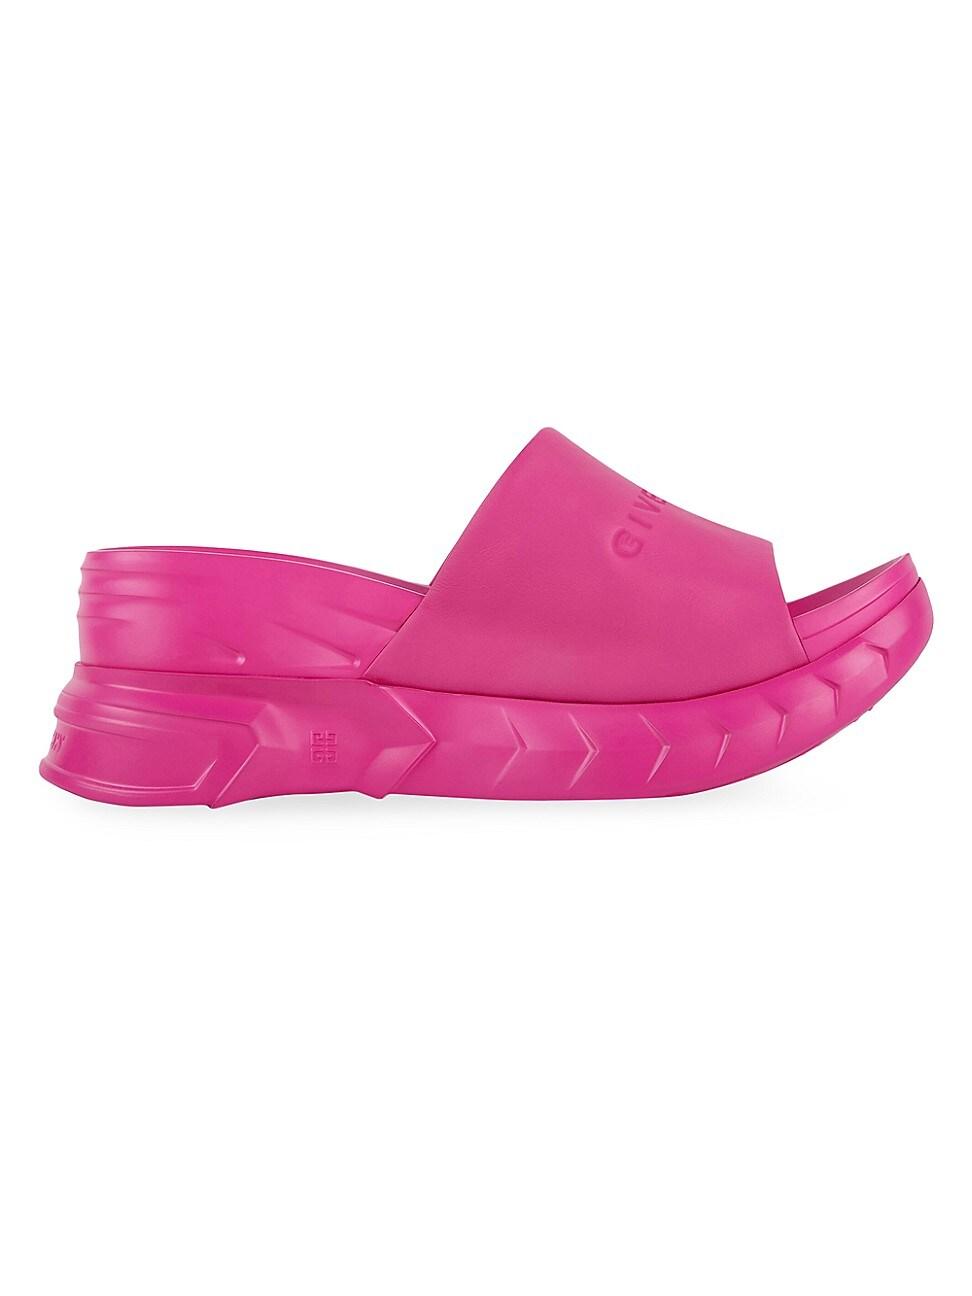 Givenchy Marshmallow Wedge Sandals In Leather in Pink | Lyst